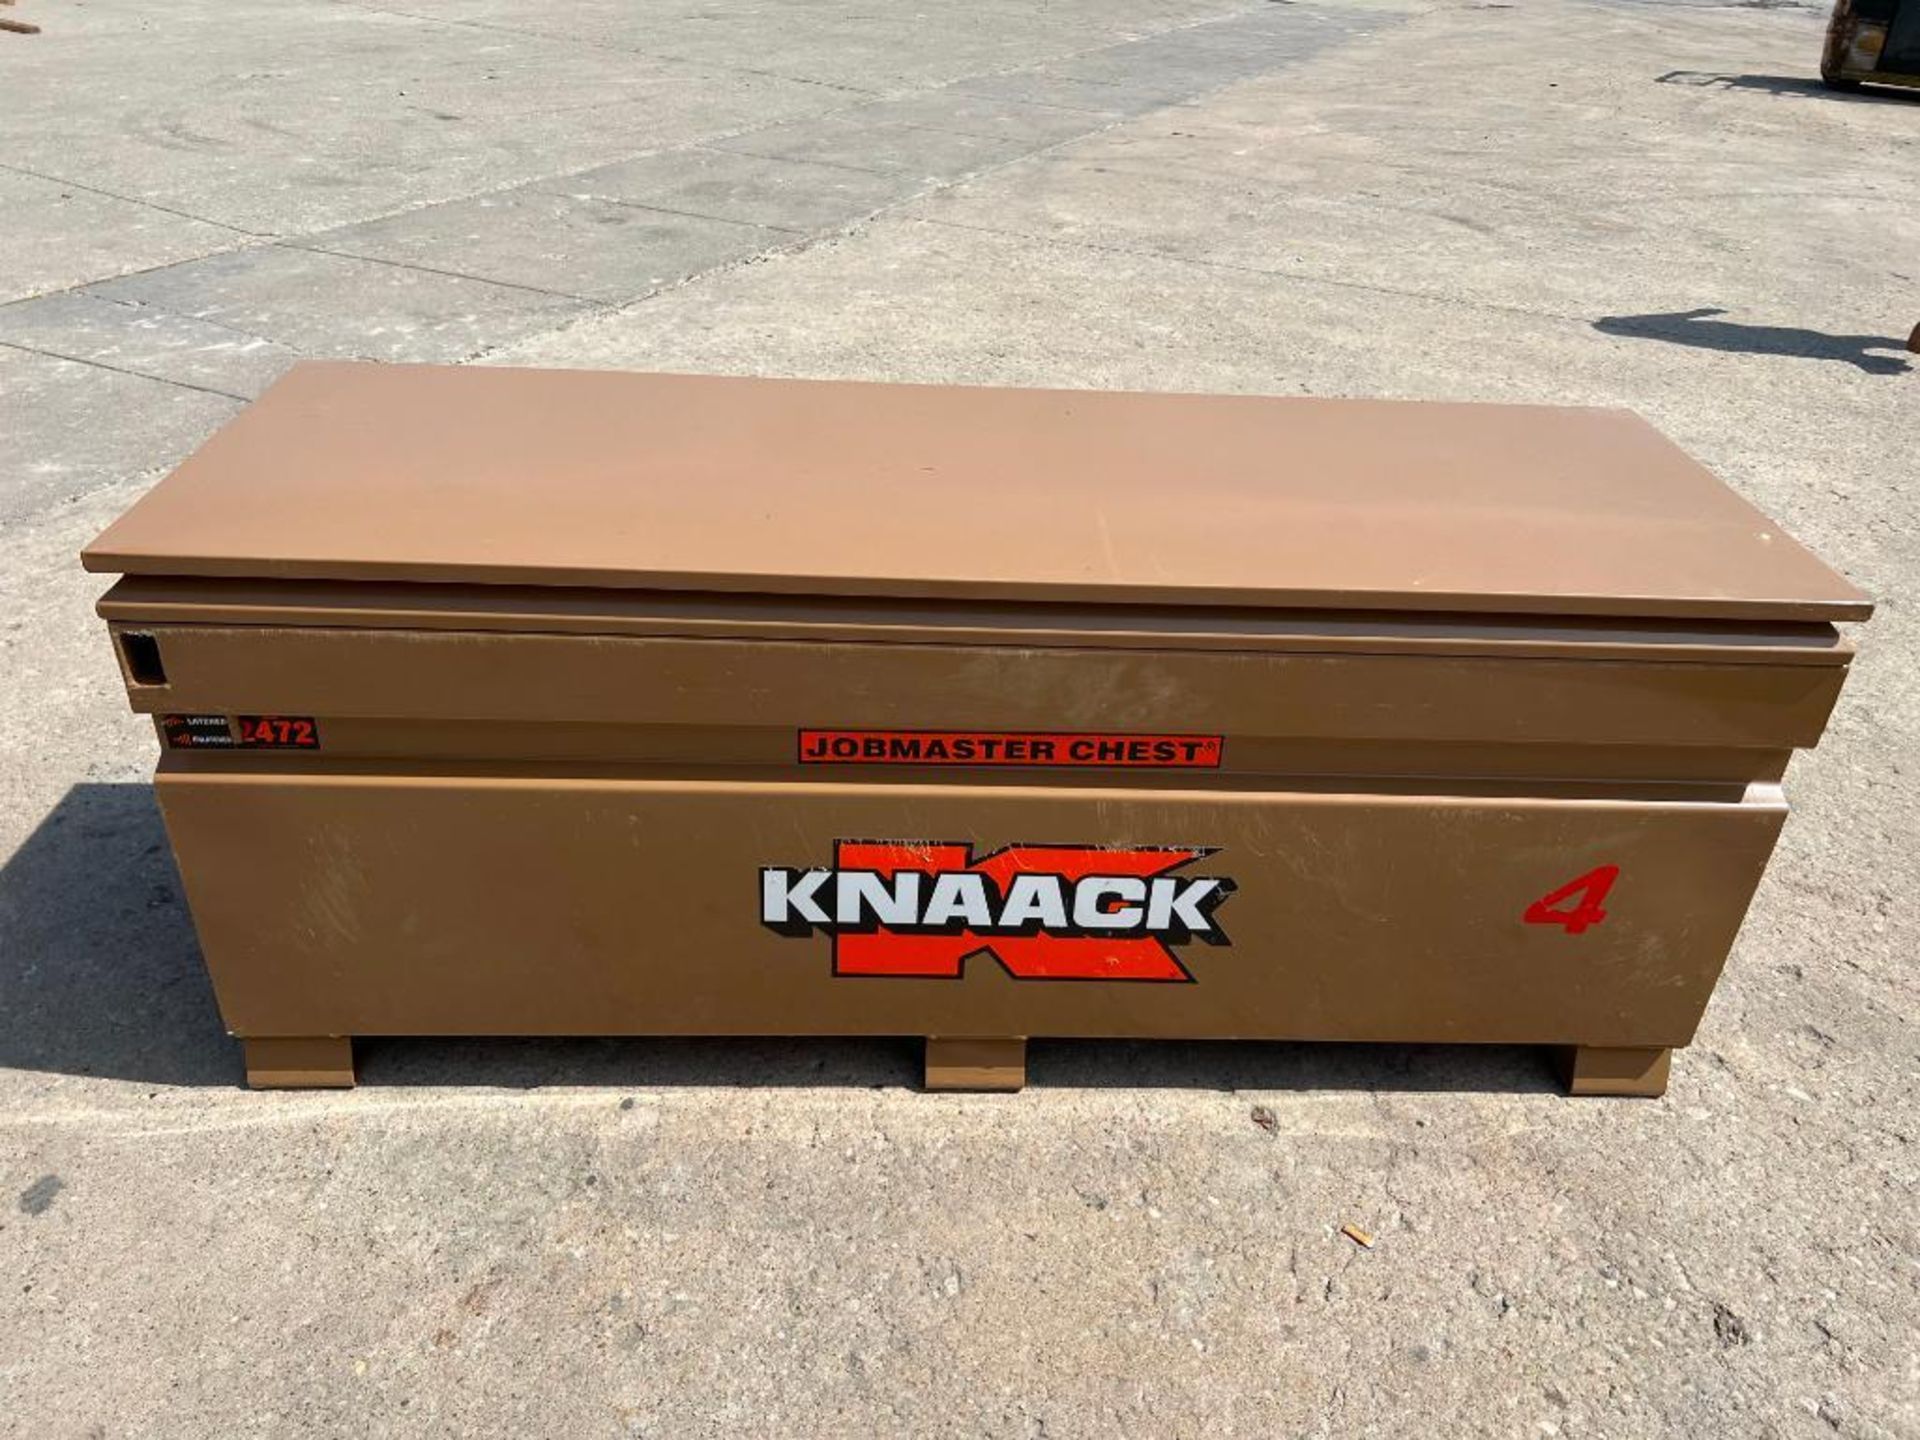 Knaack Jobmaster Chest, Model #2472, Serial #2210917032. Located in Mt. Pleasant, IA - Image 2 of 4